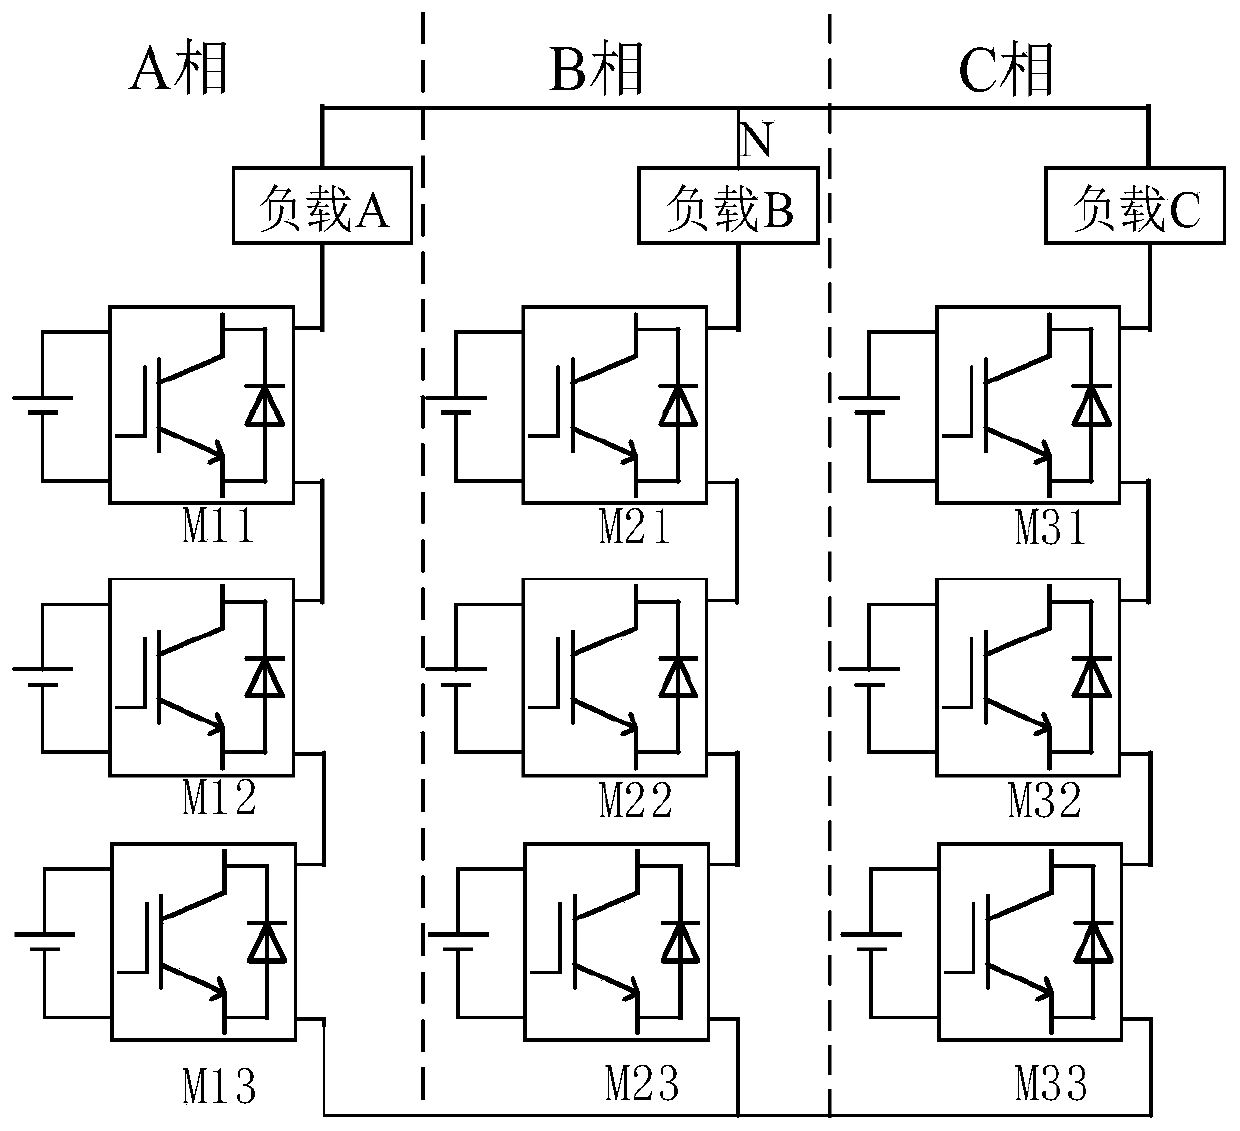 A multi-scale OGLPE feature extraction method applied to inverter faults